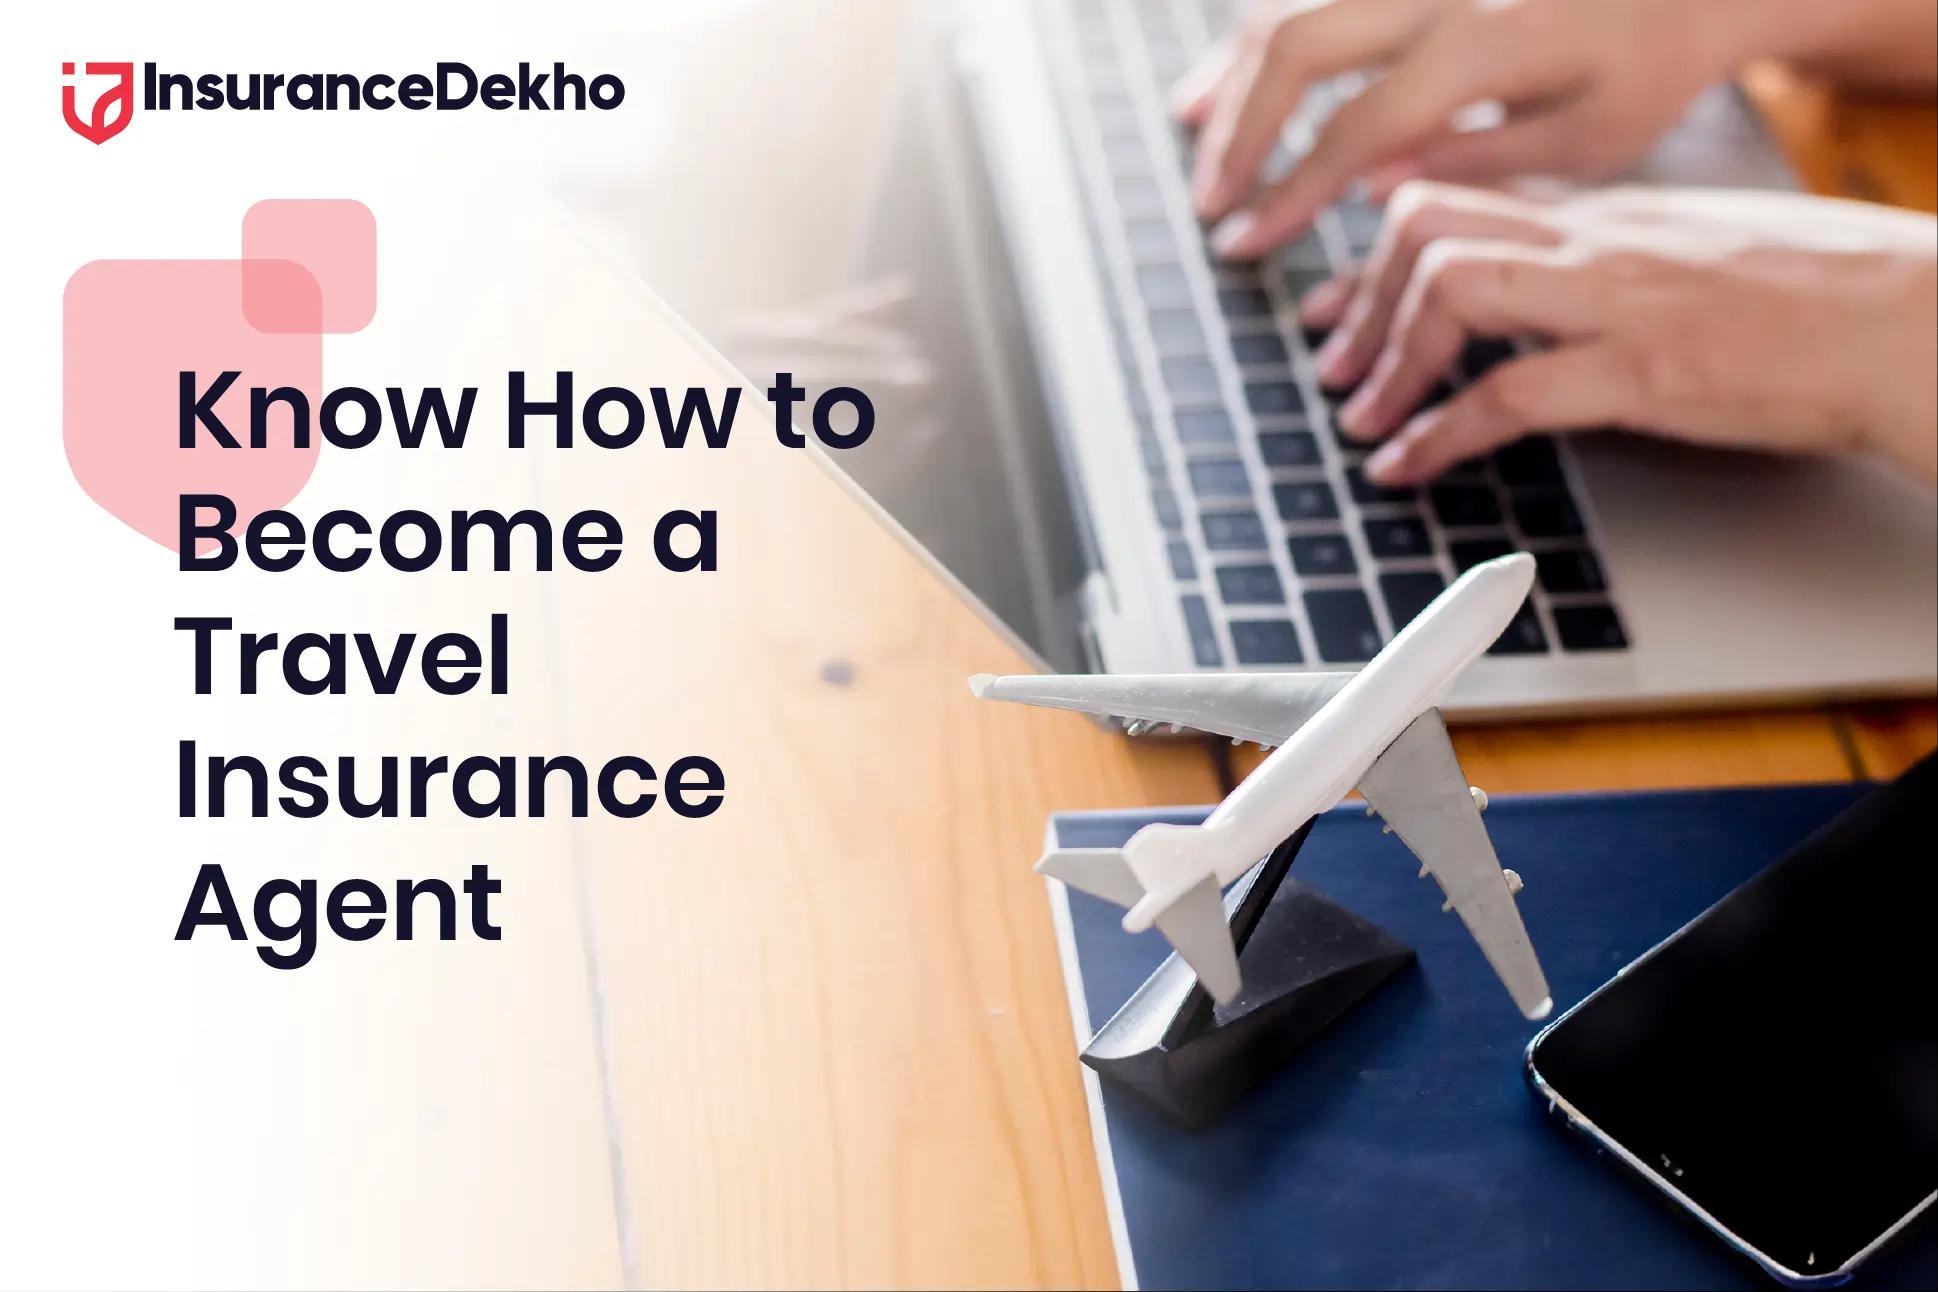 How to Become a Travel Insurance Agent?